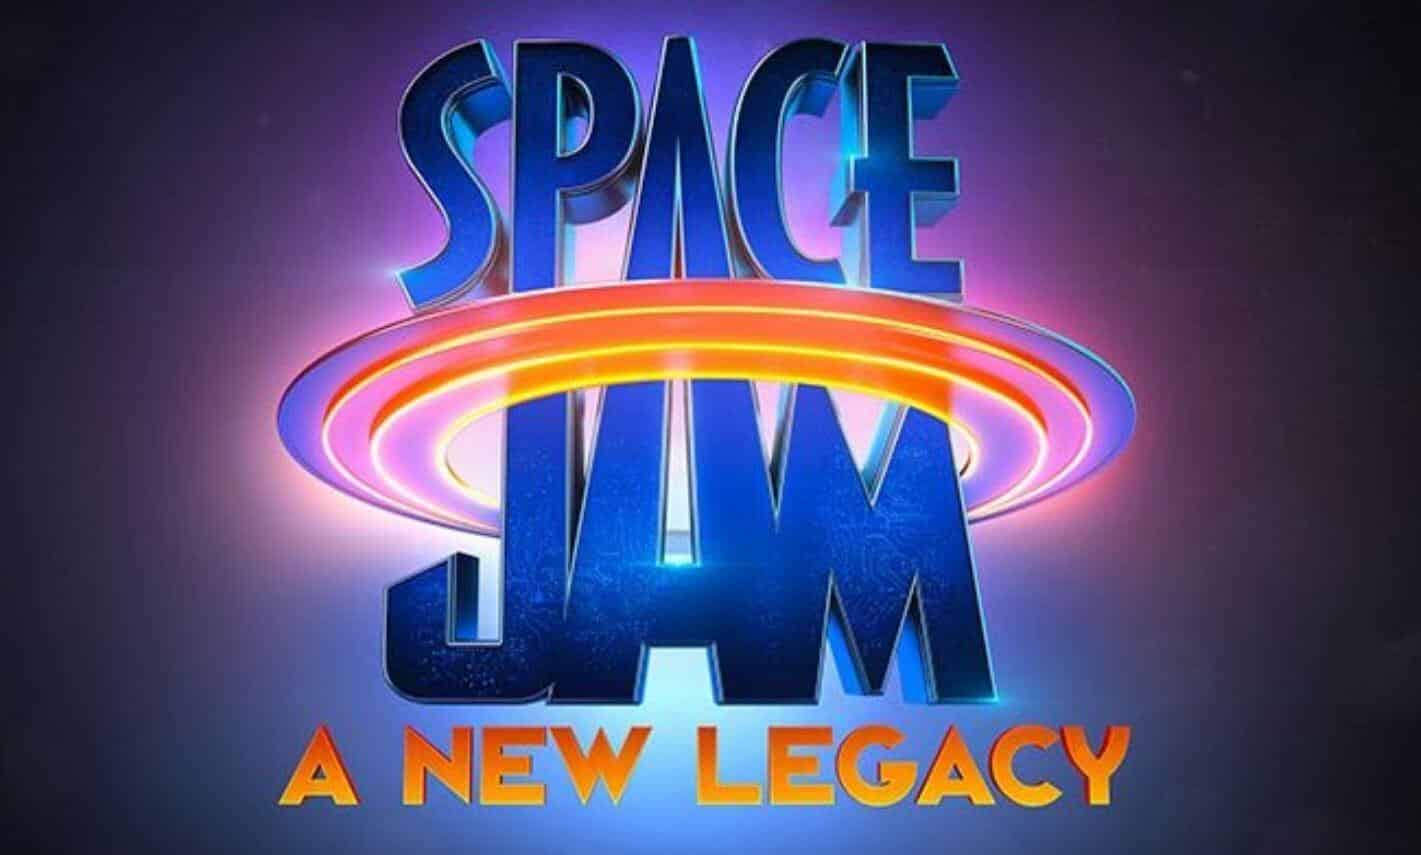 space jam: a new legacy